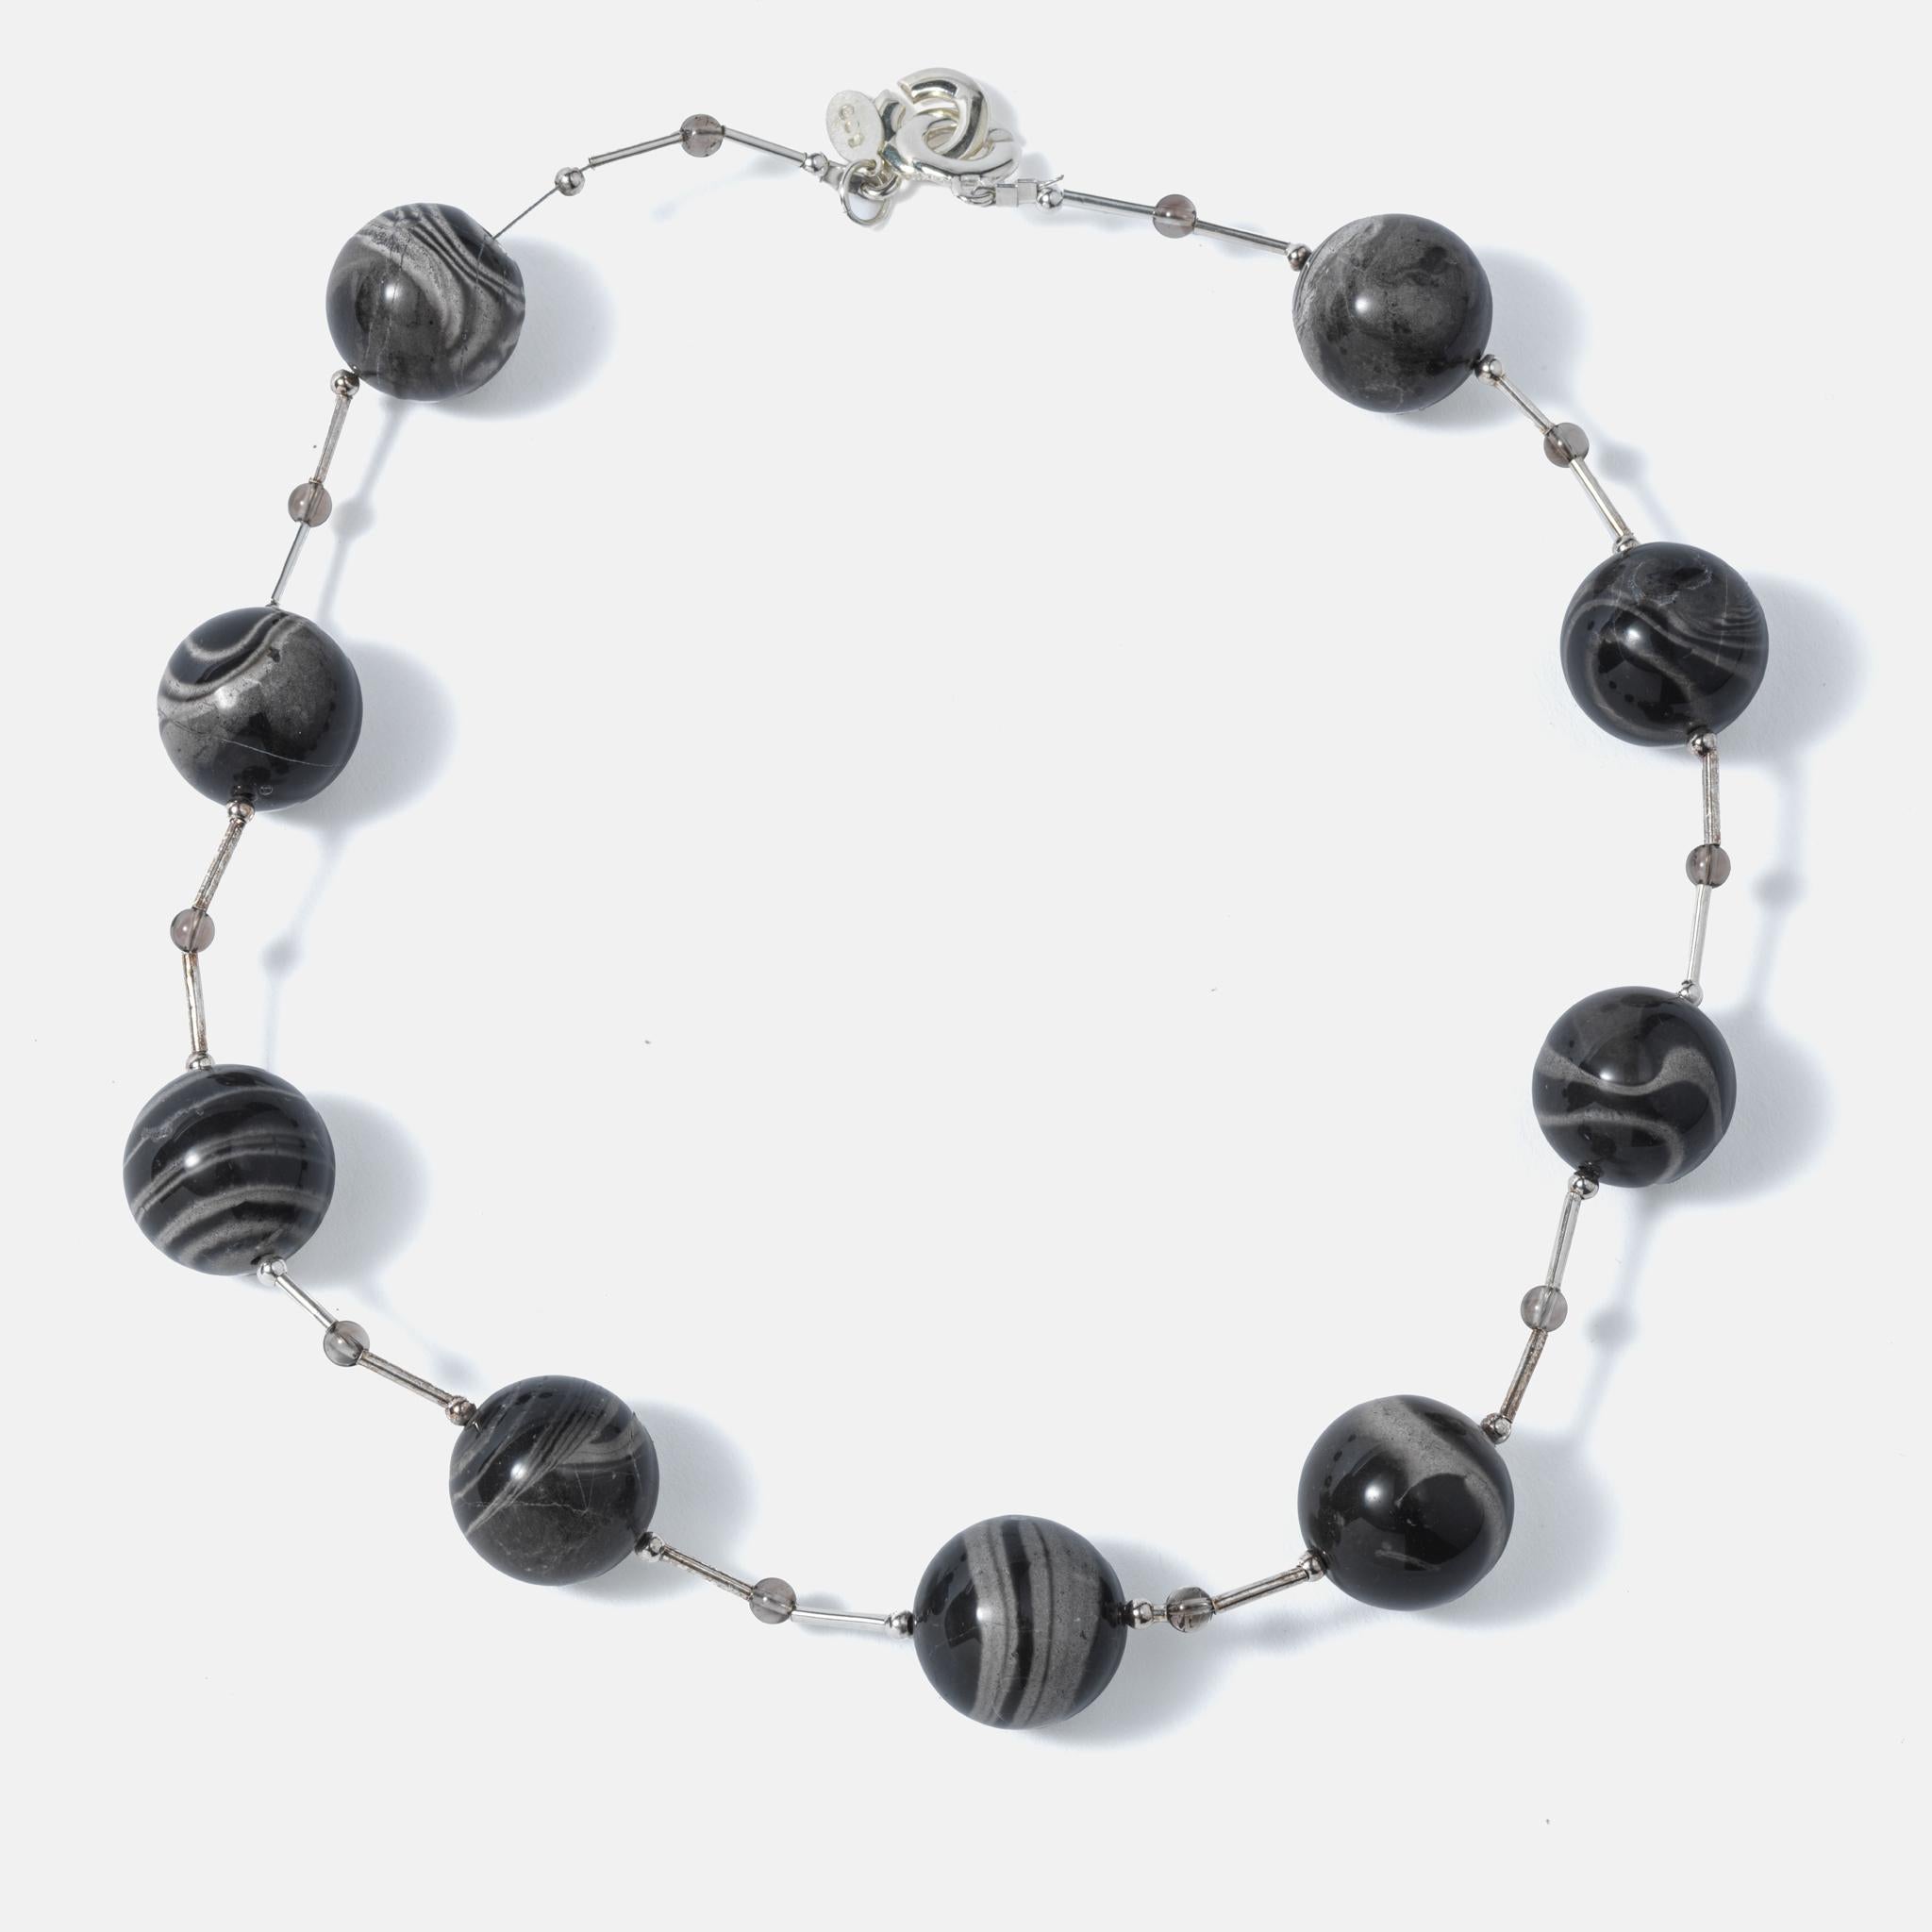 A modern and playful necklace made of silver pools with large balls of zebra jasper. Made by Ragnar Levi (1961-) who is a Swedish artist that have been working in many fields to create his works. 
This is a great example of his works.
